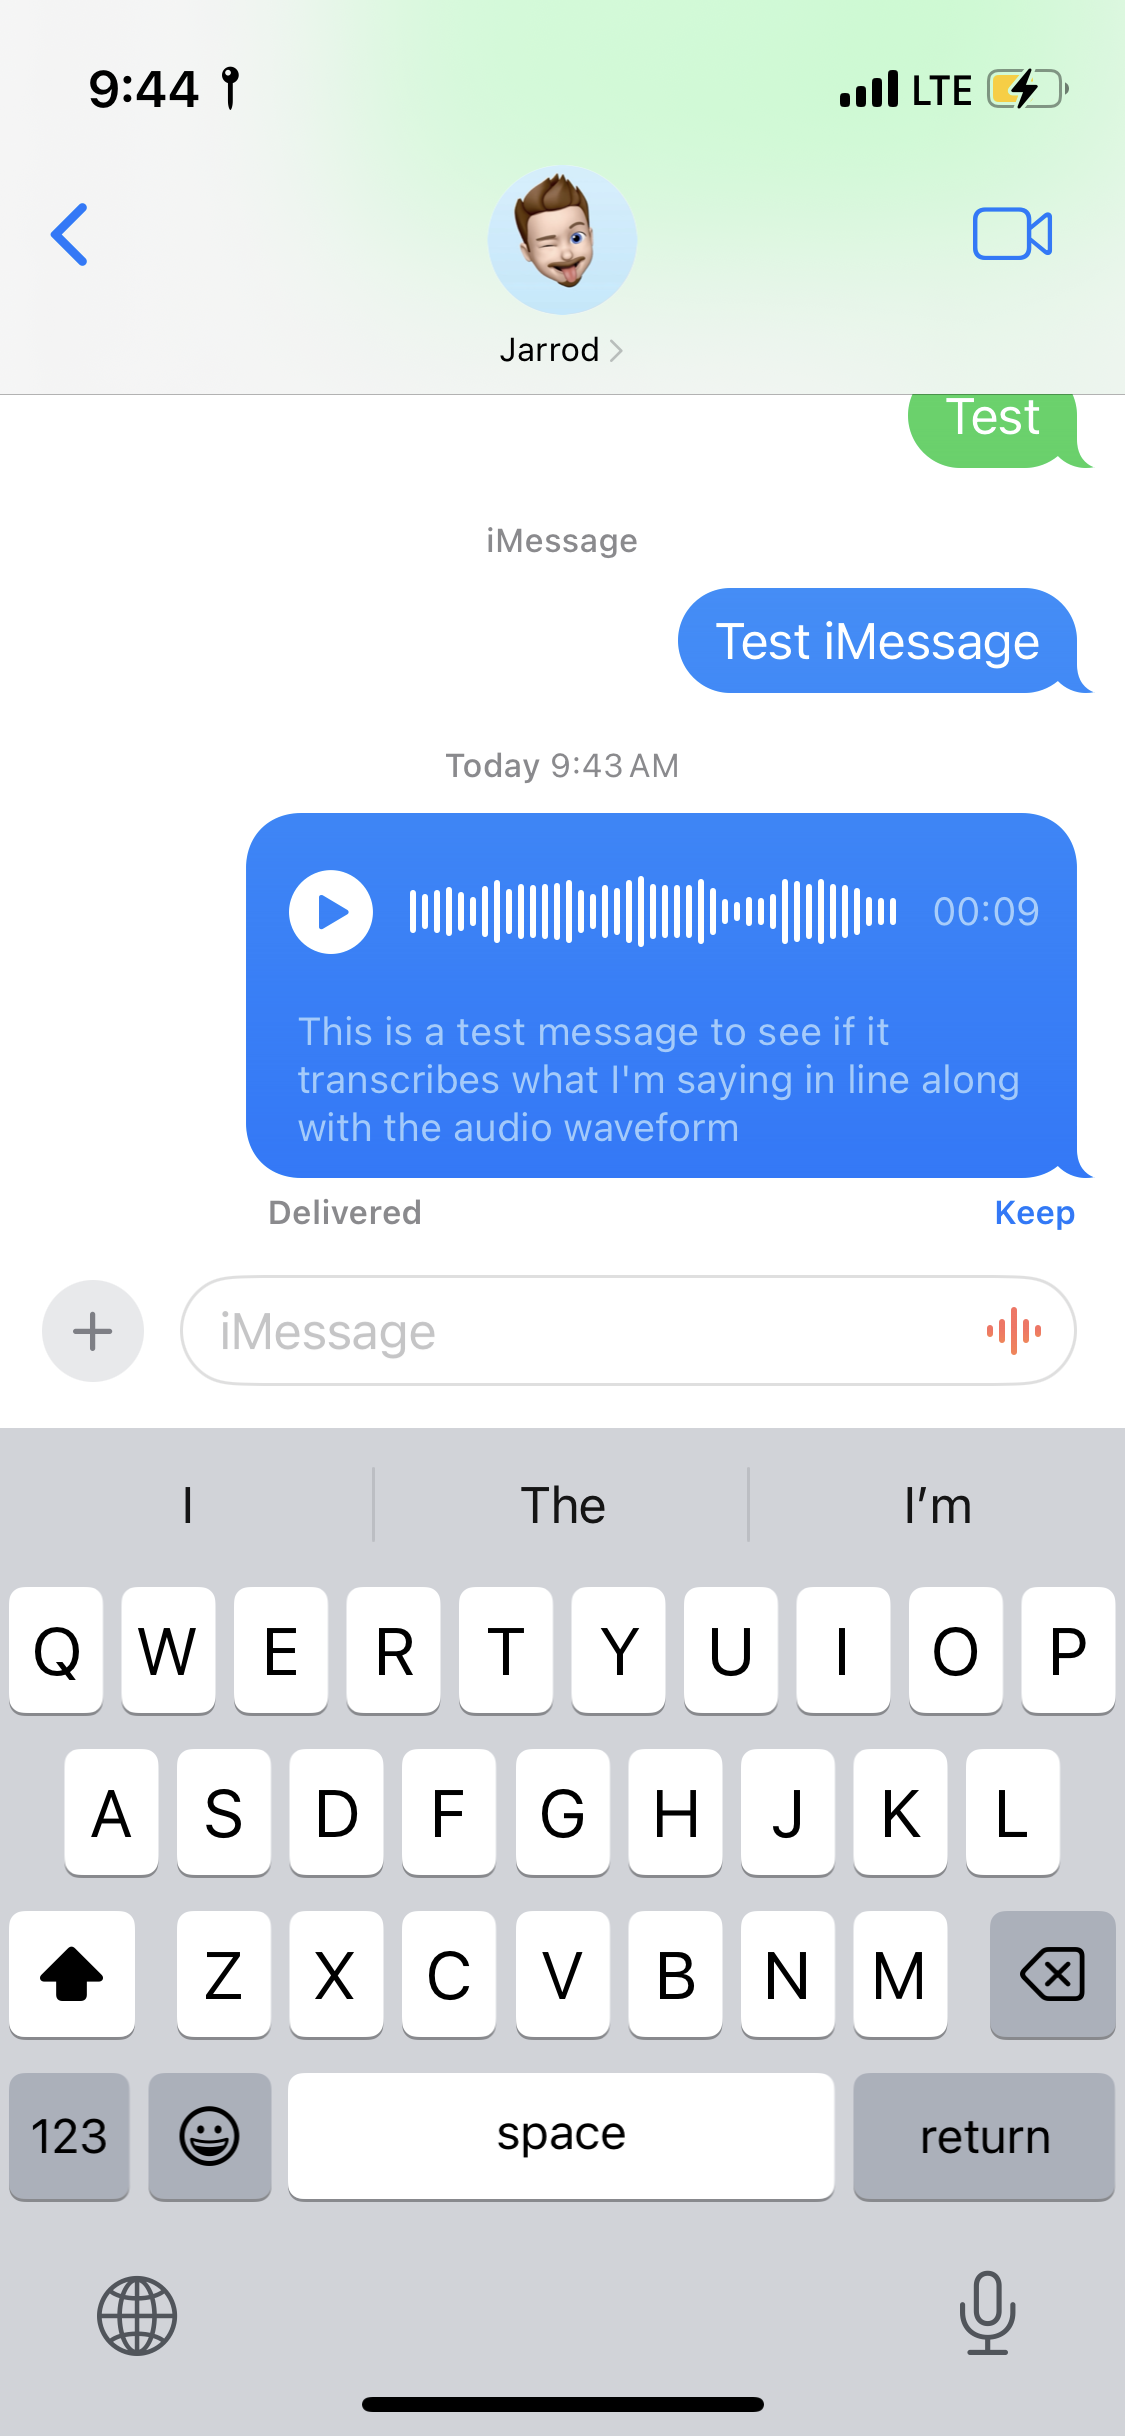 A smartphone screen displays a text messaging app with an audio message transcript: "This is a test message to see if it transcribes what I'm saying in line along with the audio waveform" with a blue play button.